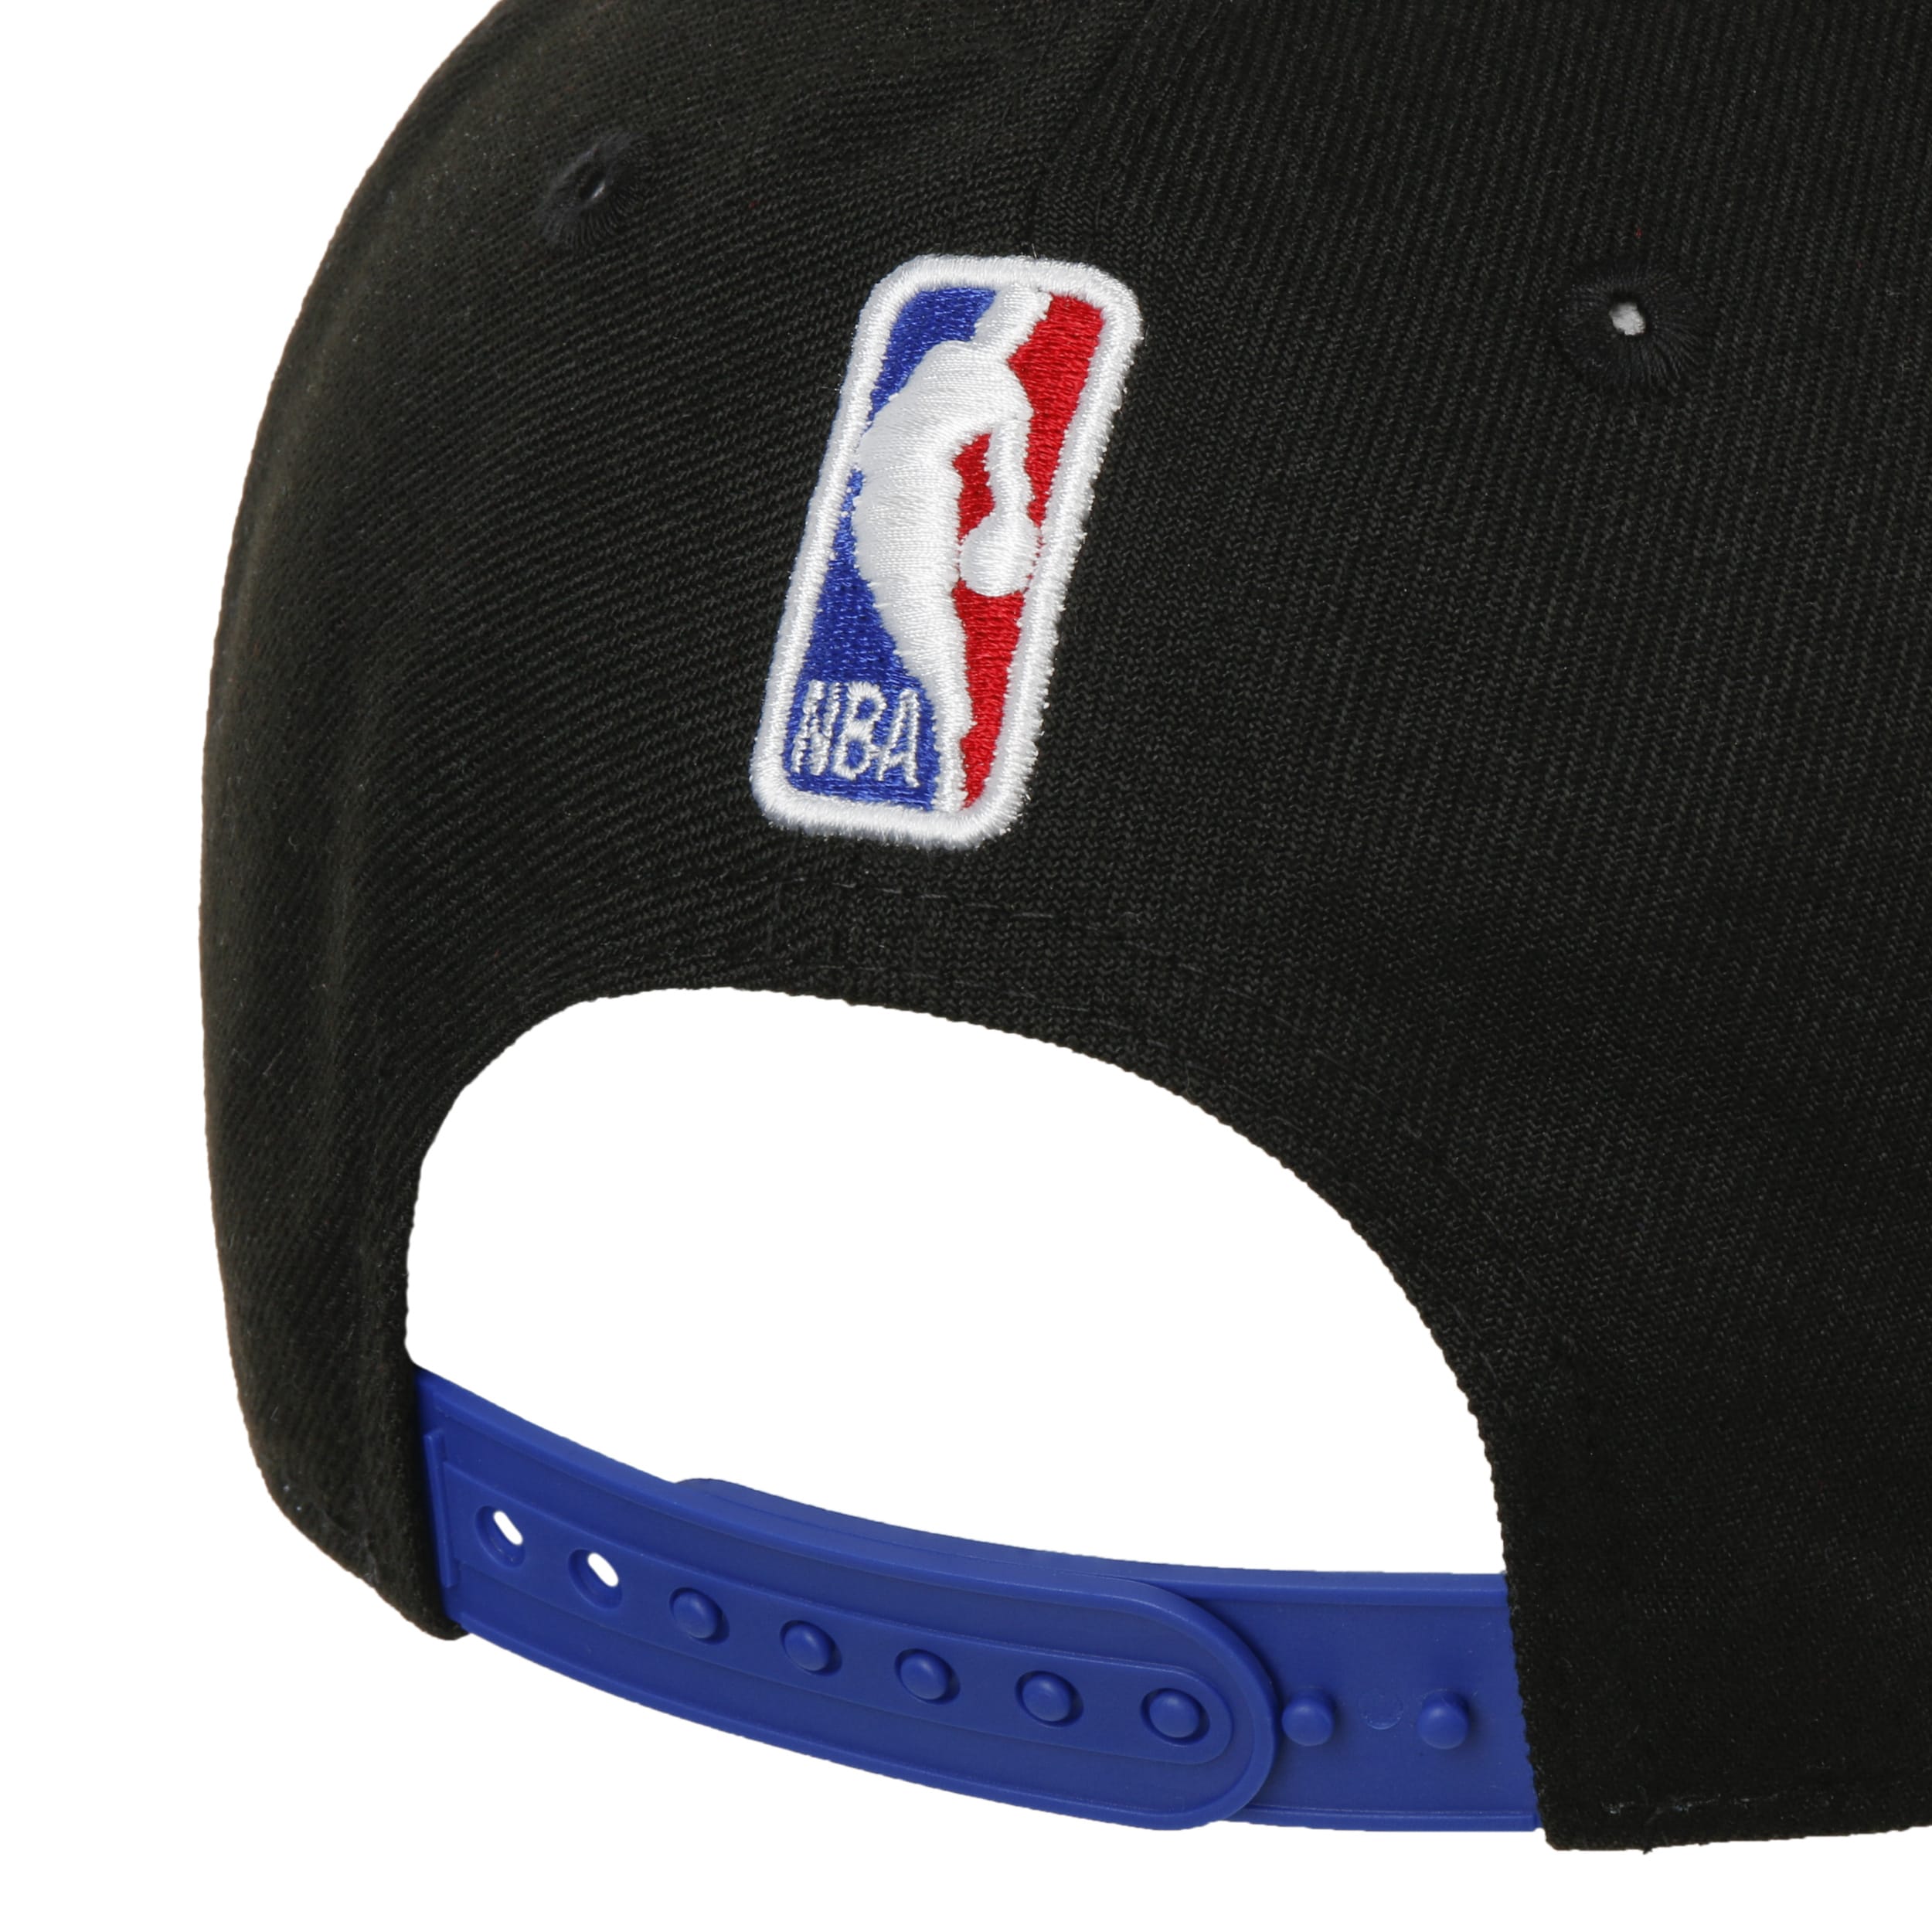 9Fifty NBA Tip-Off 76ers Cap by New Era